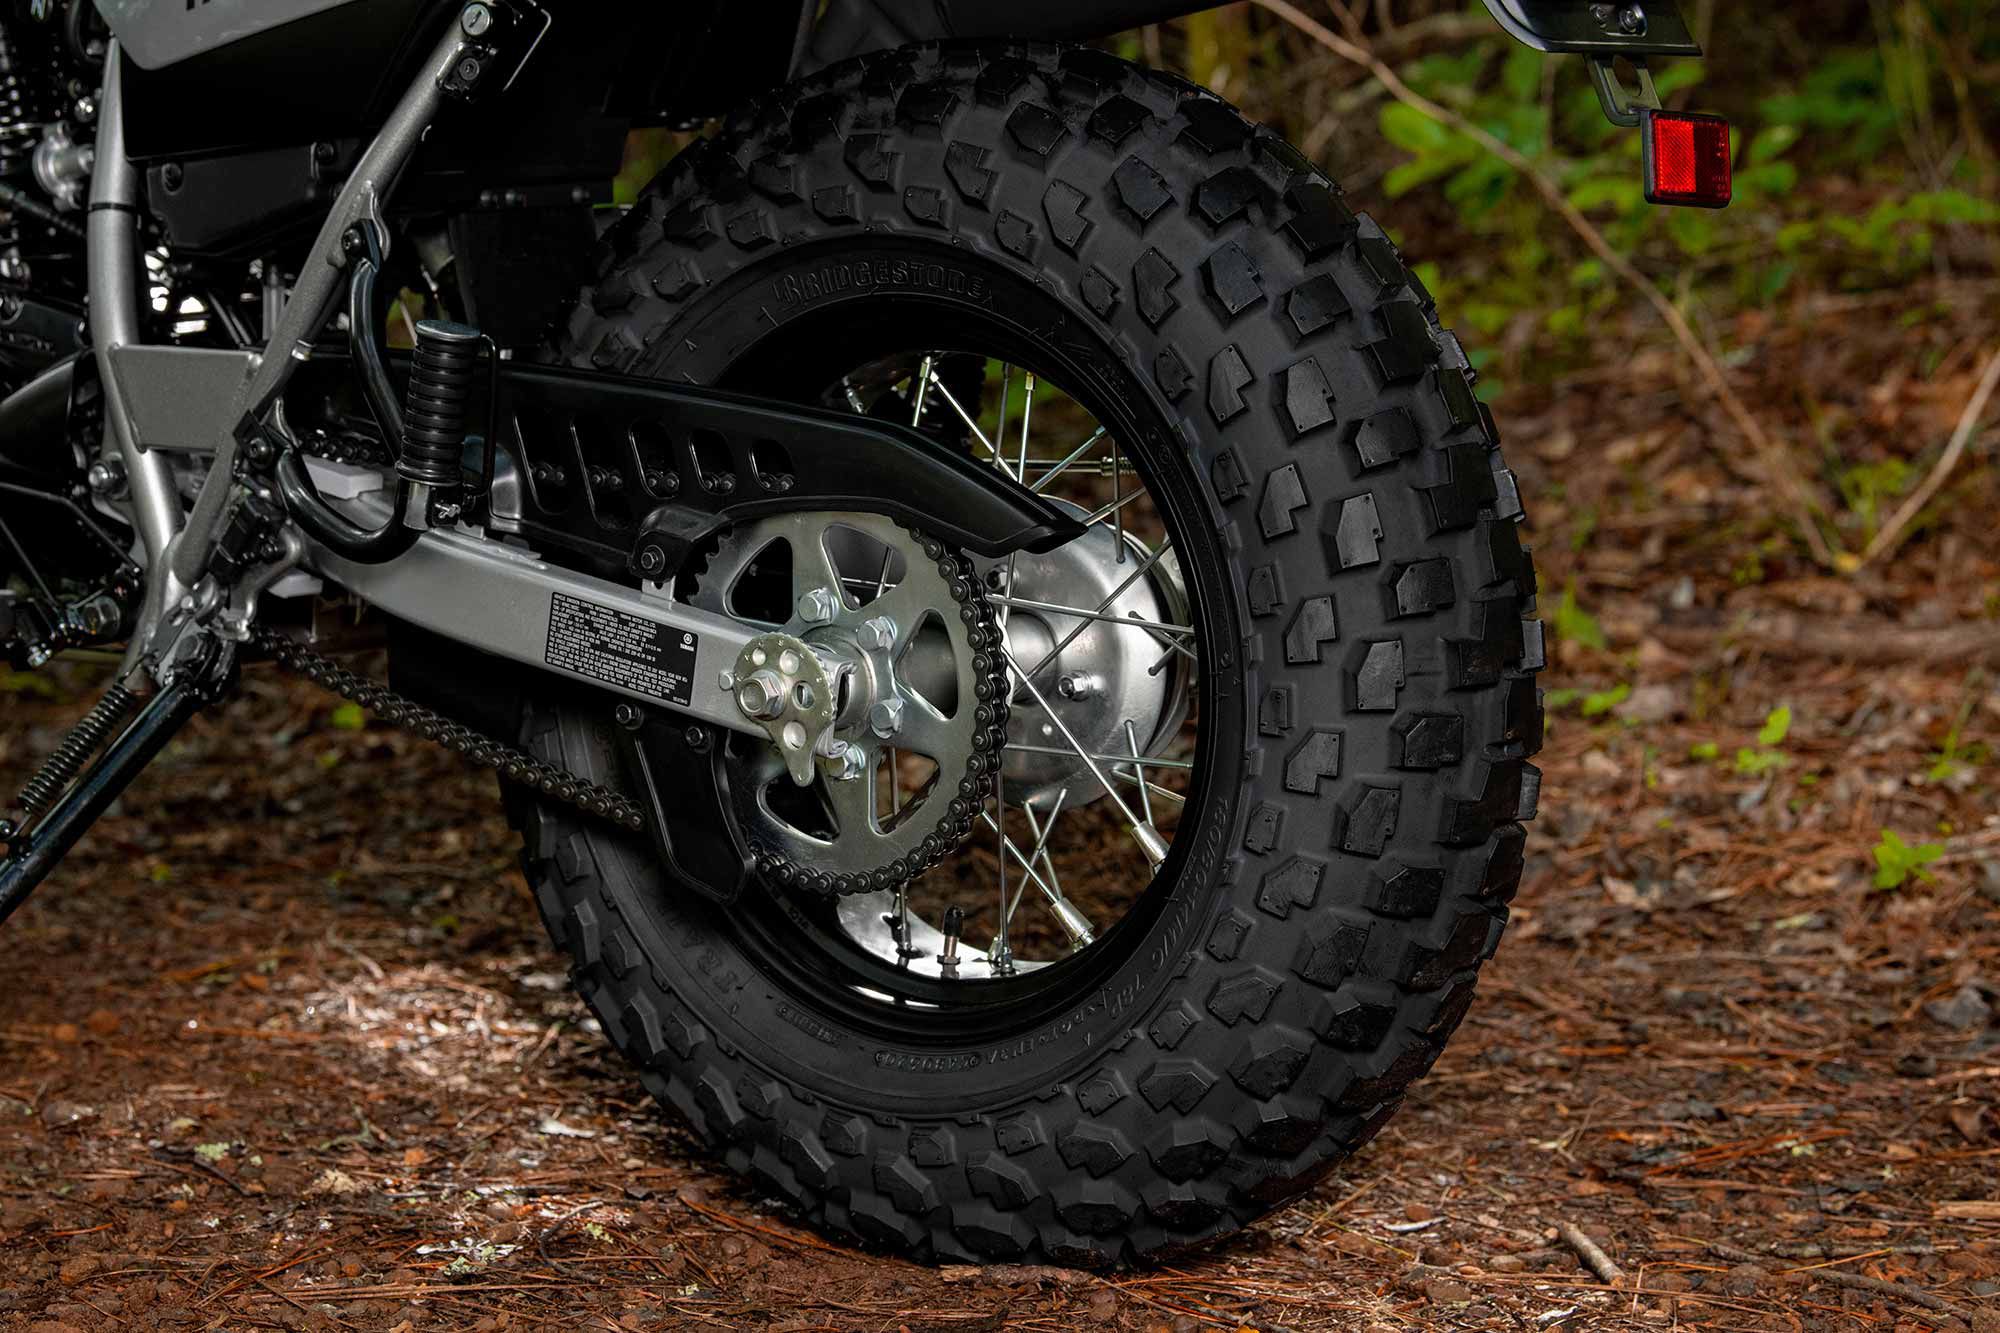 The tire tread of the rear wheel nearly meets the spoked rim. Bring on the rocky roads.